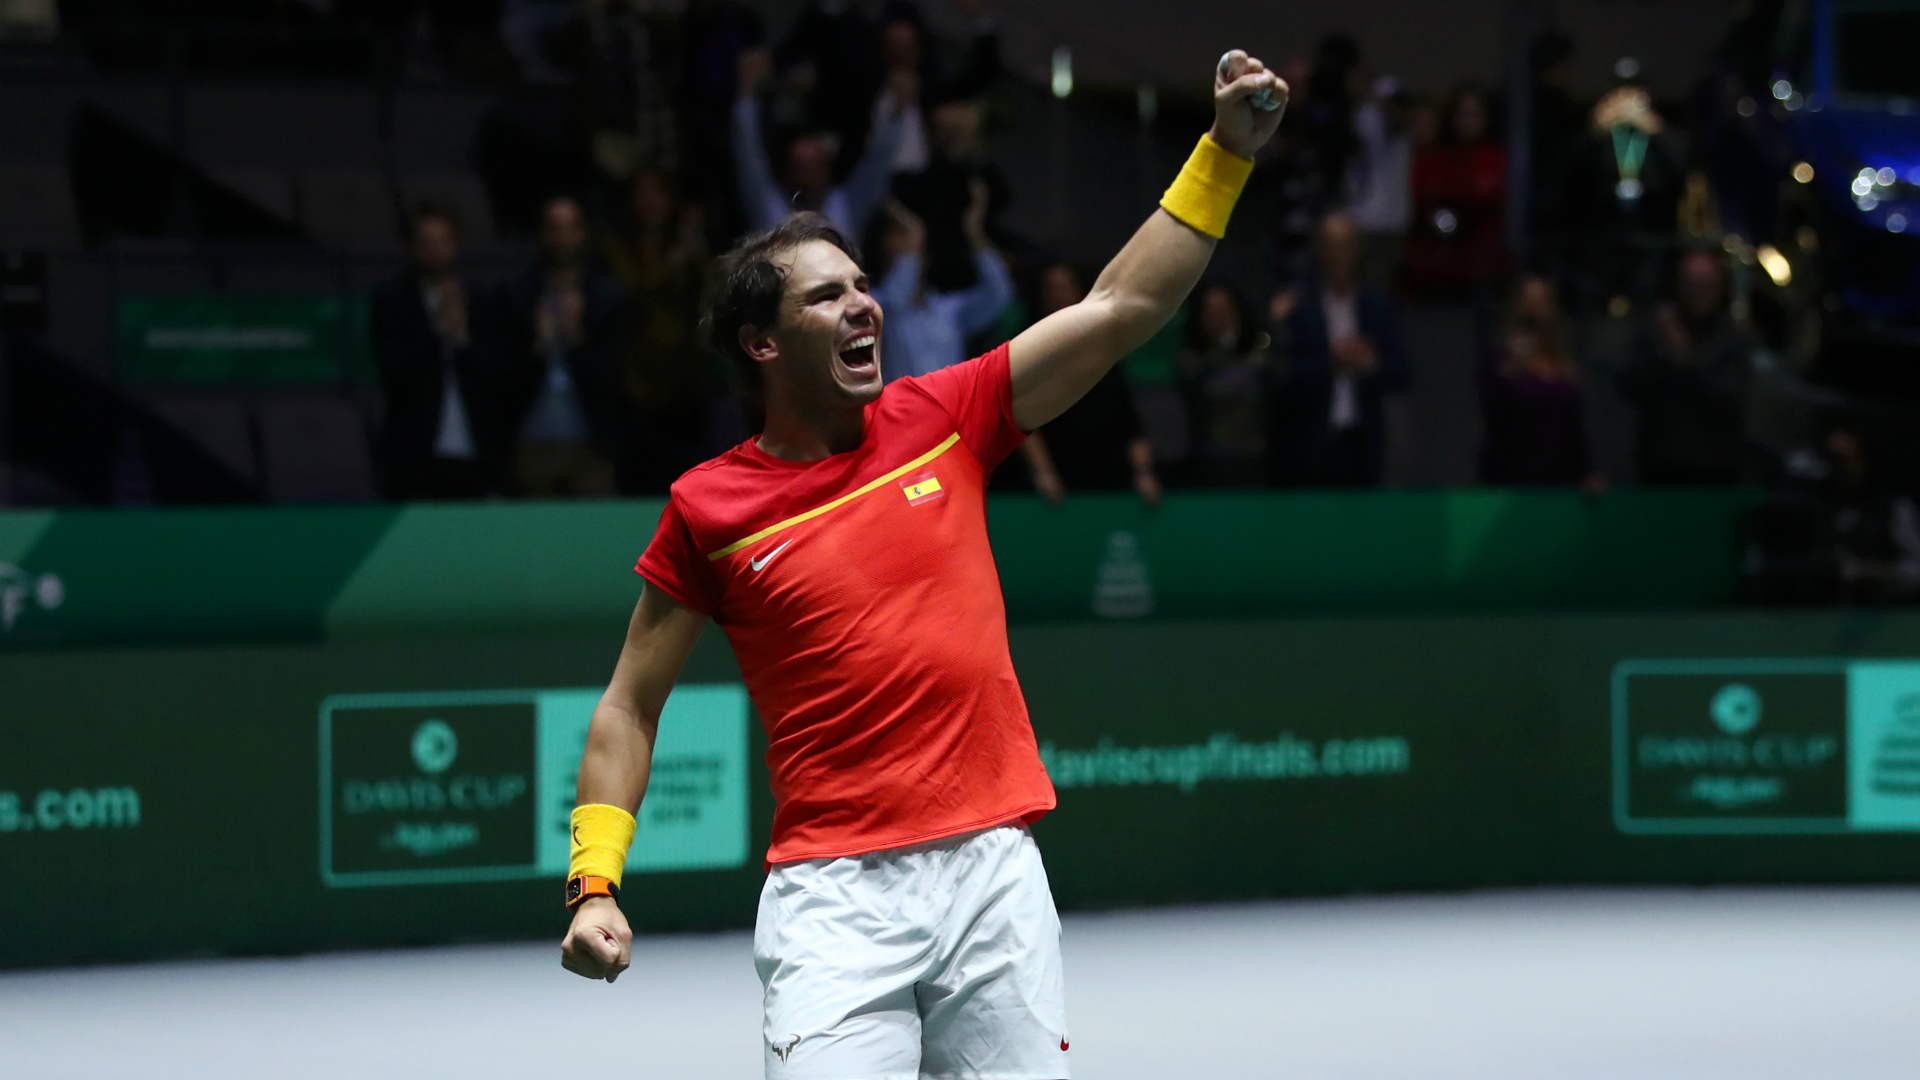 Rafael Nadal and Feliciano Lopez produced doubles heroics against a resilient British pair as Spain reached the Davis Cup final in Madrid.